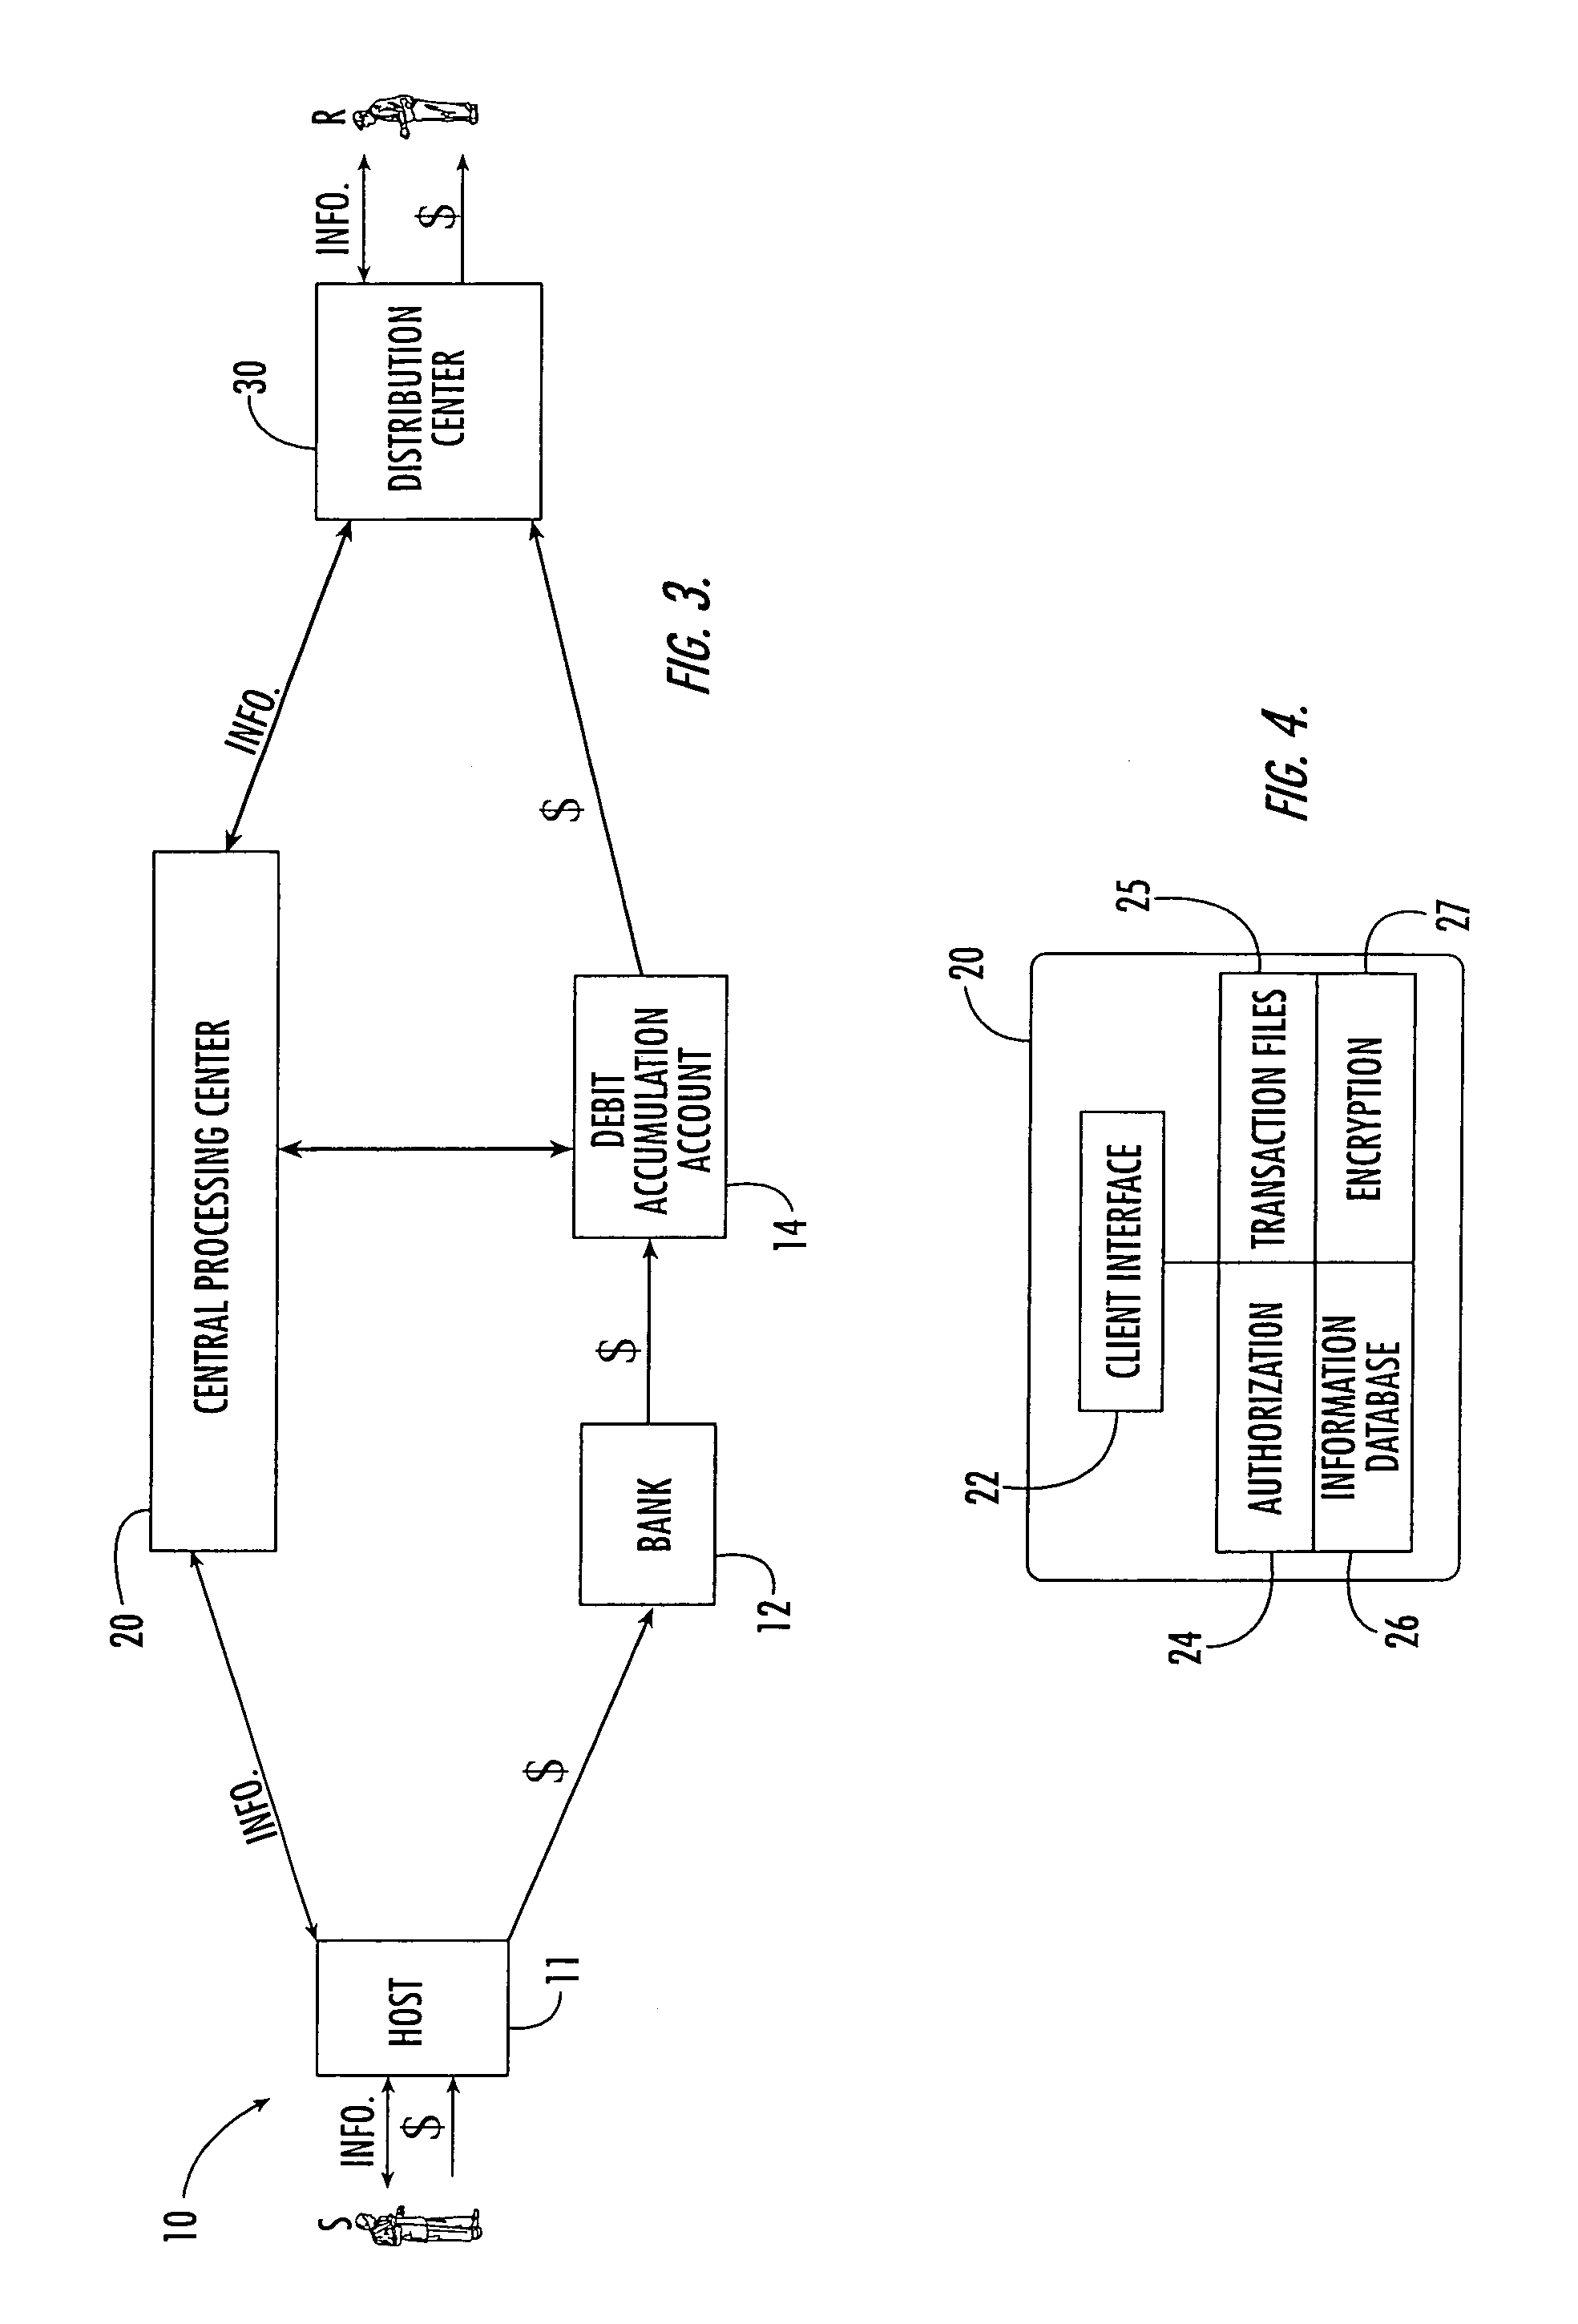 Methods and systems for transferring funds